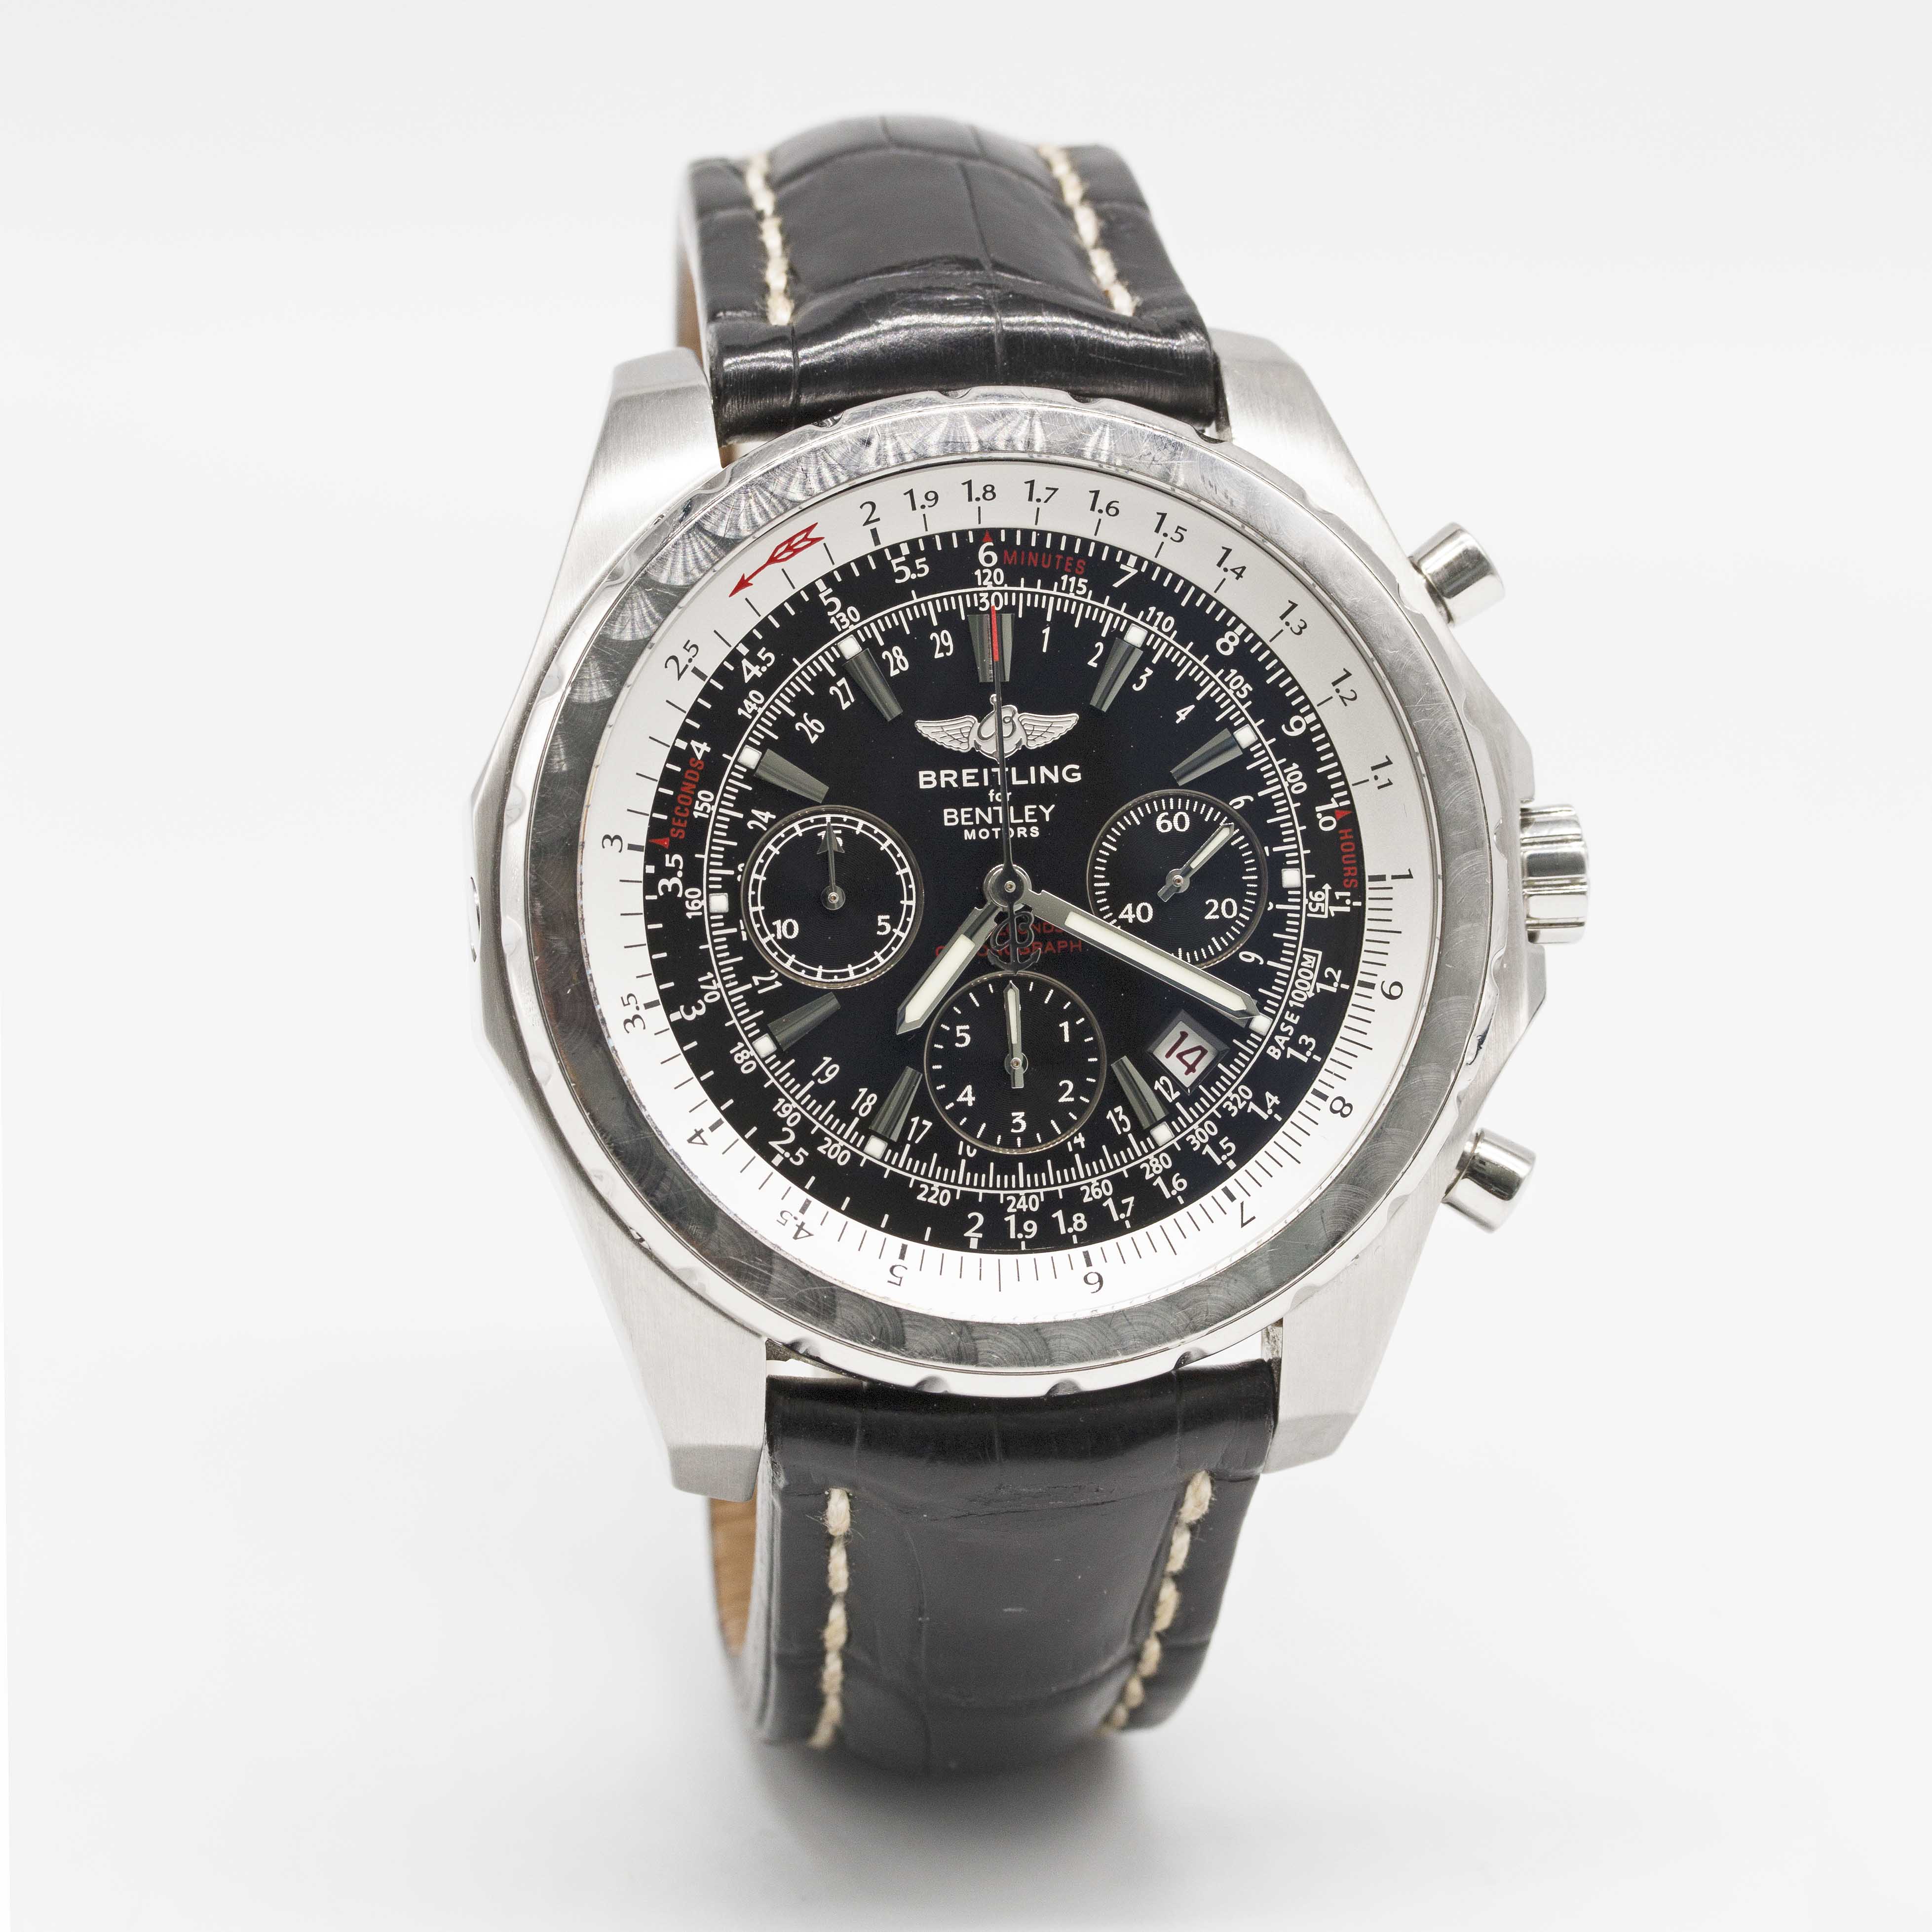 A STAINLESS STEEL BREITLING BENTLEY MOTORS T CHRONOGRAPH WRIST WATCH CIRCA 2007, REF. A25363 WITH - Image 4 of 9